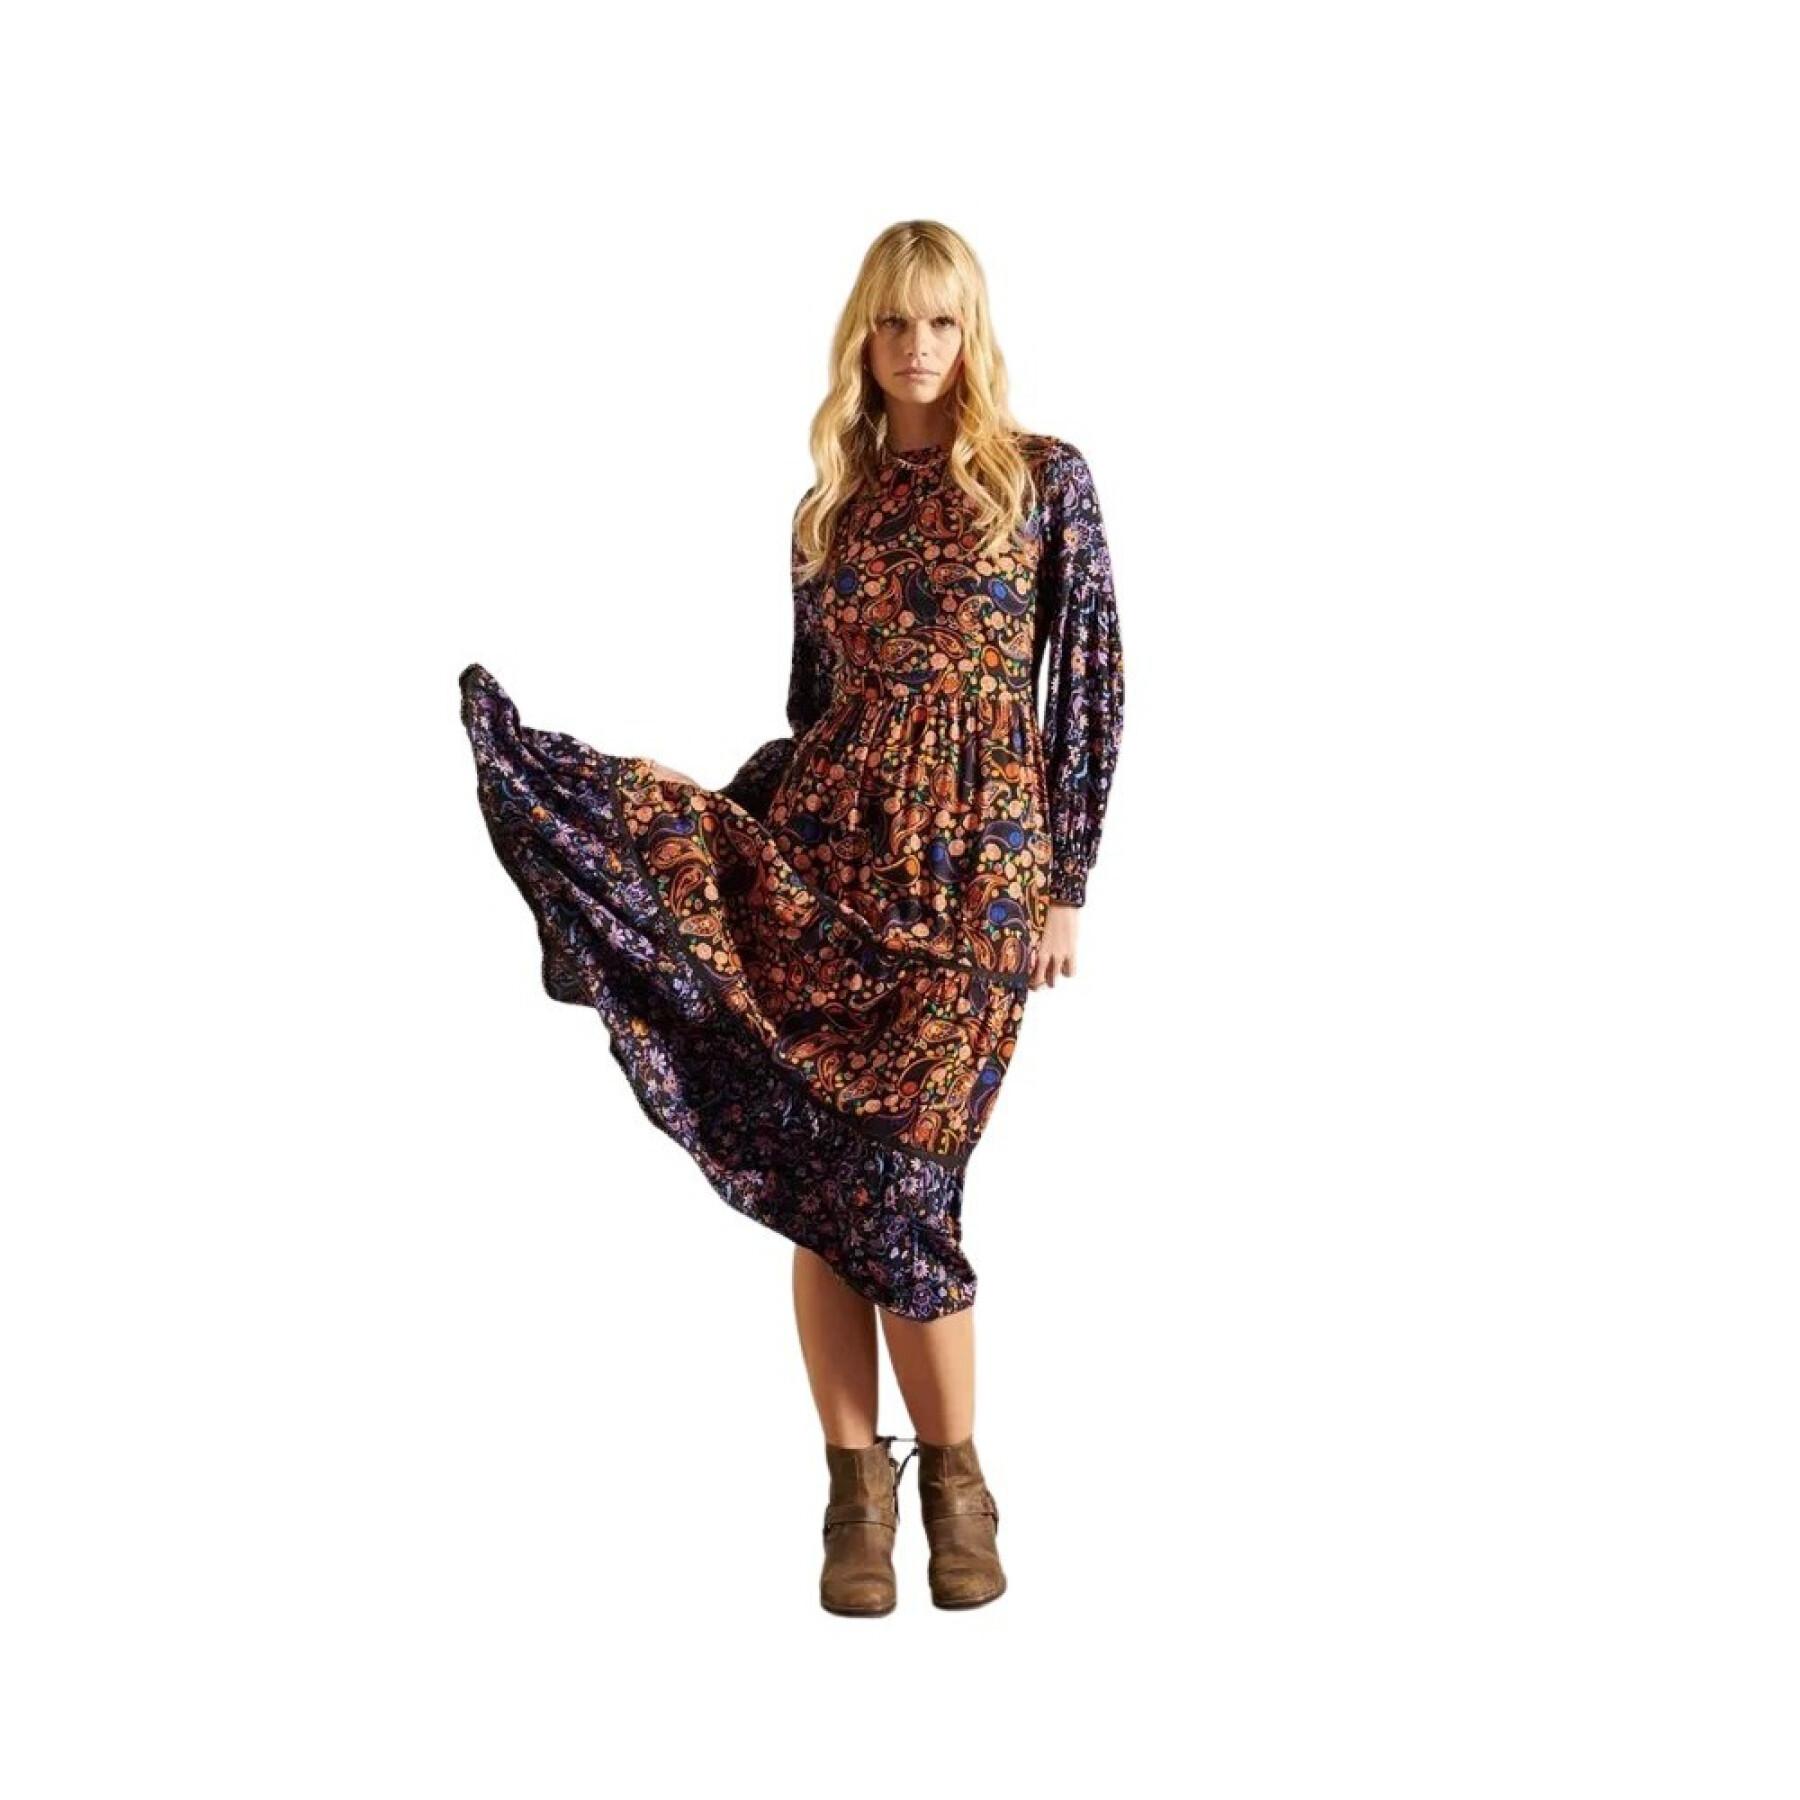 Women's long sleeve woven dress with paisley print Superdry